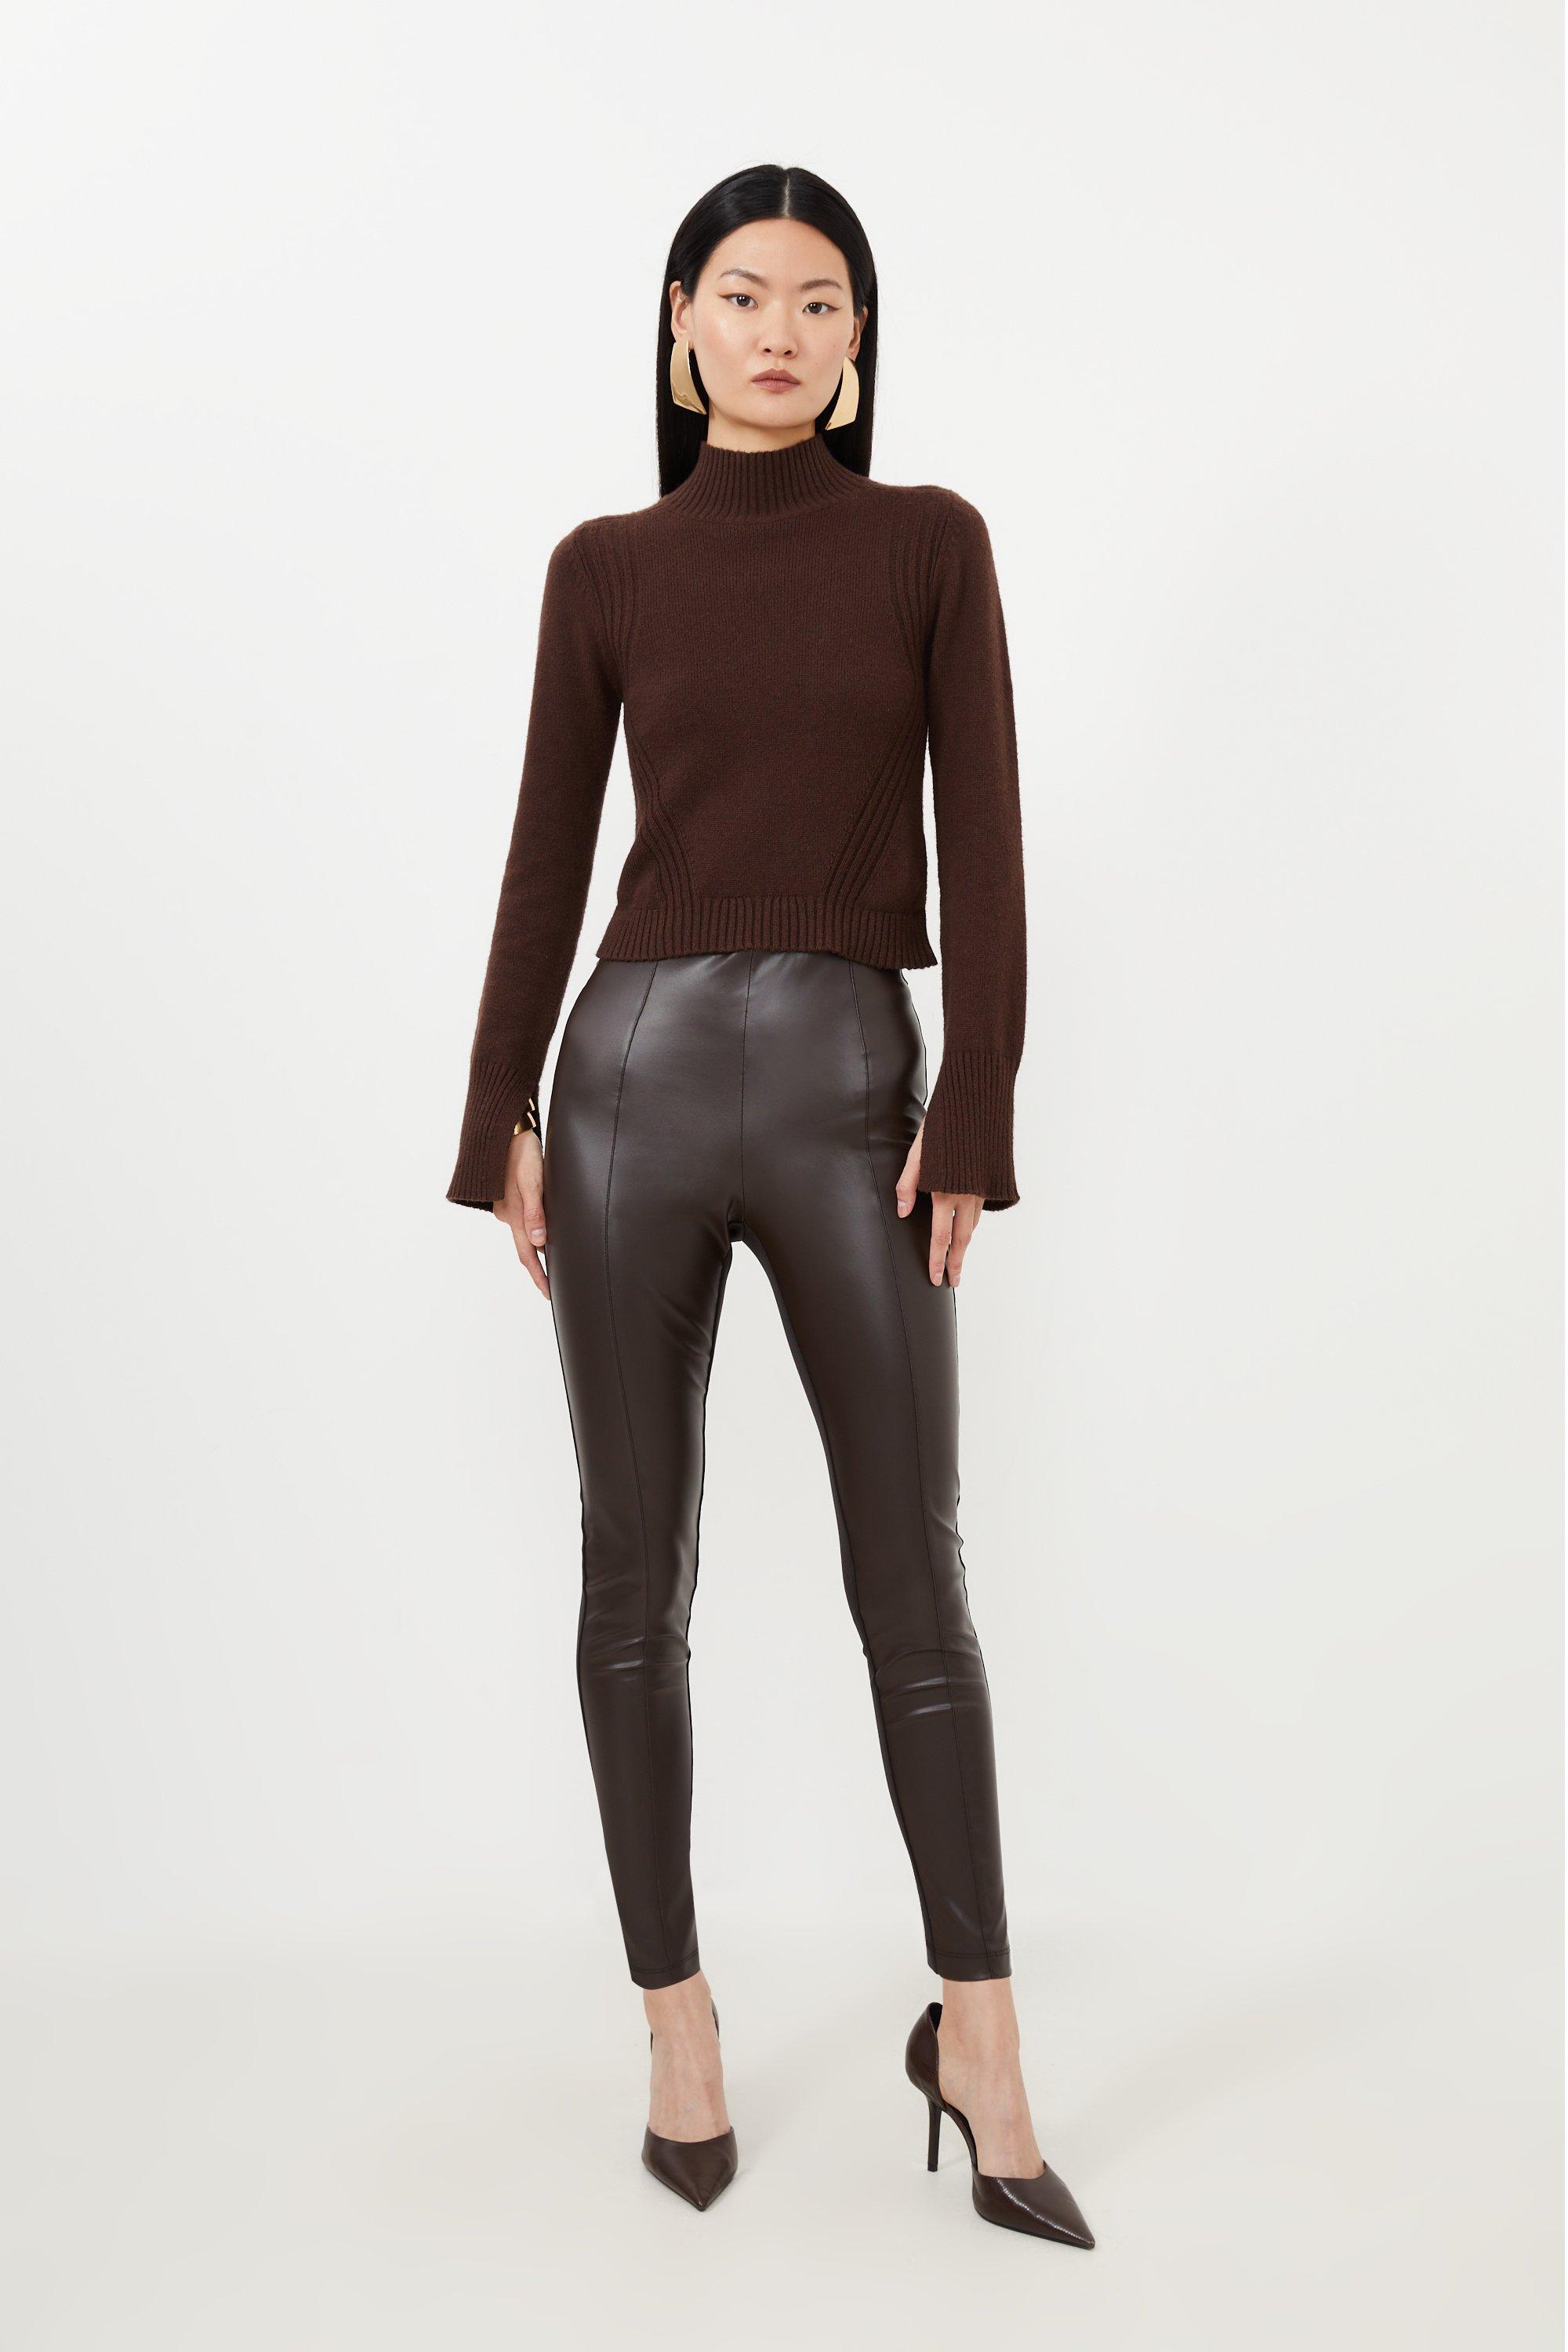 Zara NEW belted faux leather pants brown